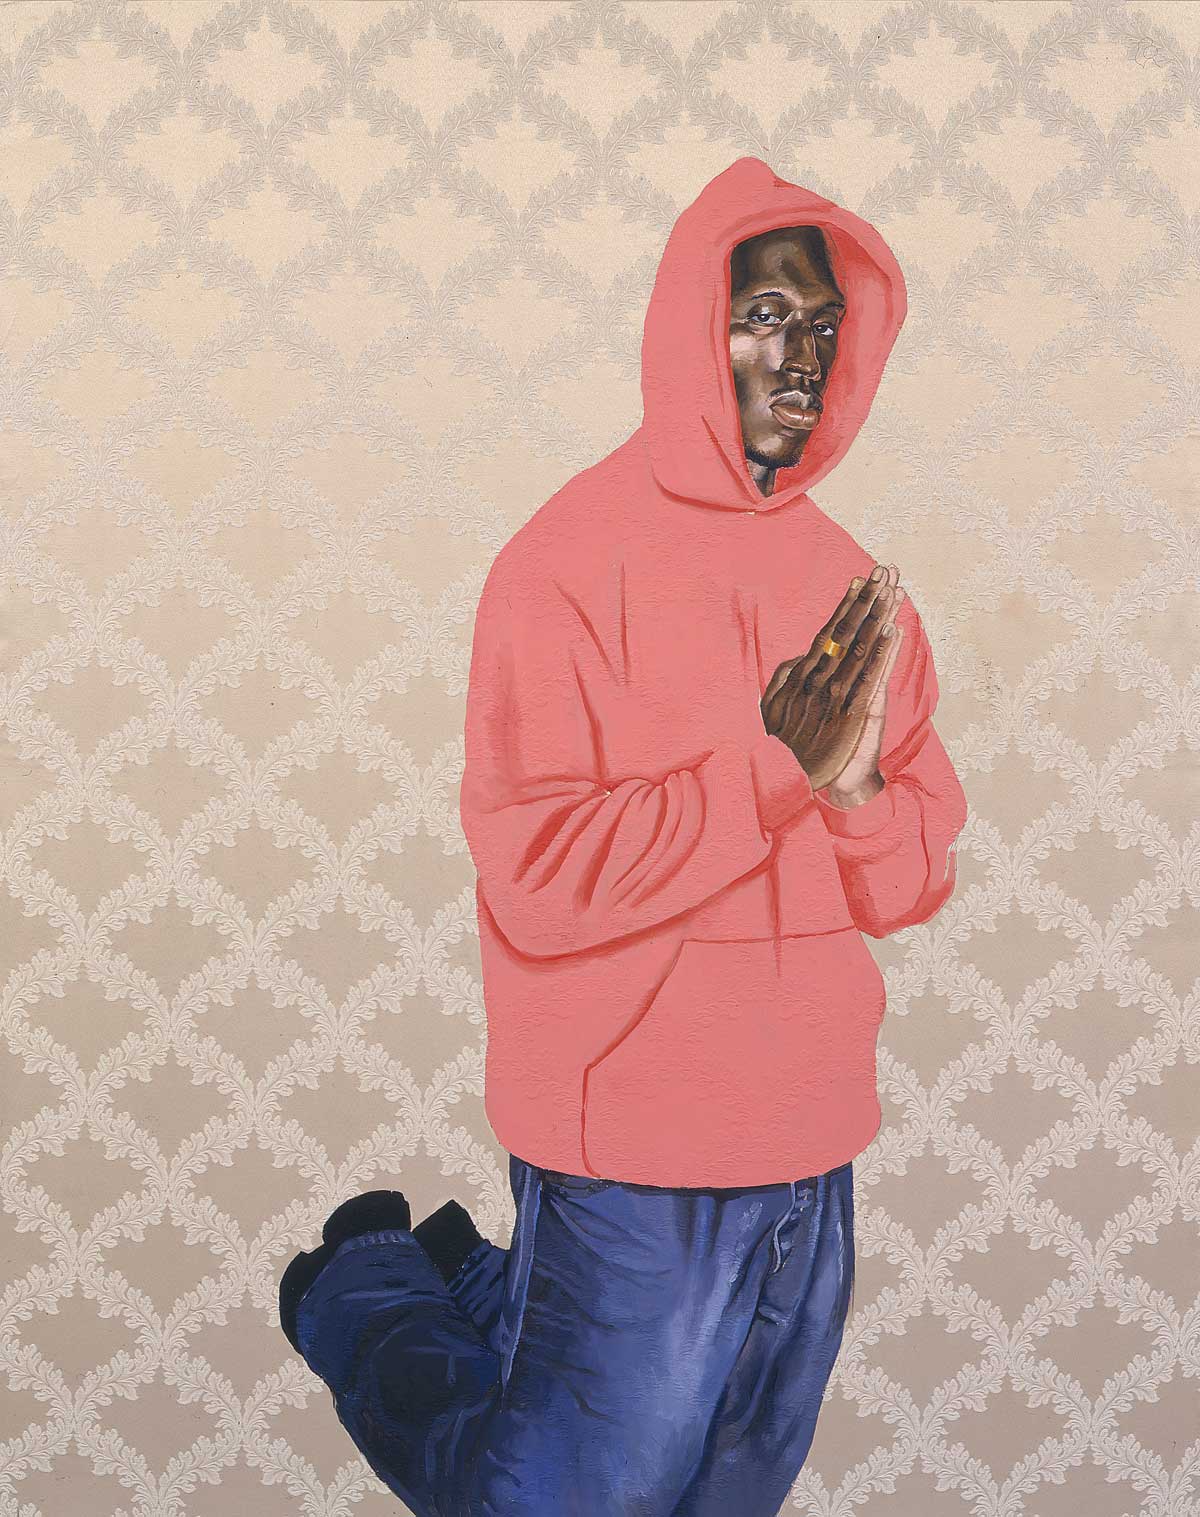 Kehinde Wiley | Passing / Posing  | Passing / Posing #13, 2002 Oil on Fabric. | 1